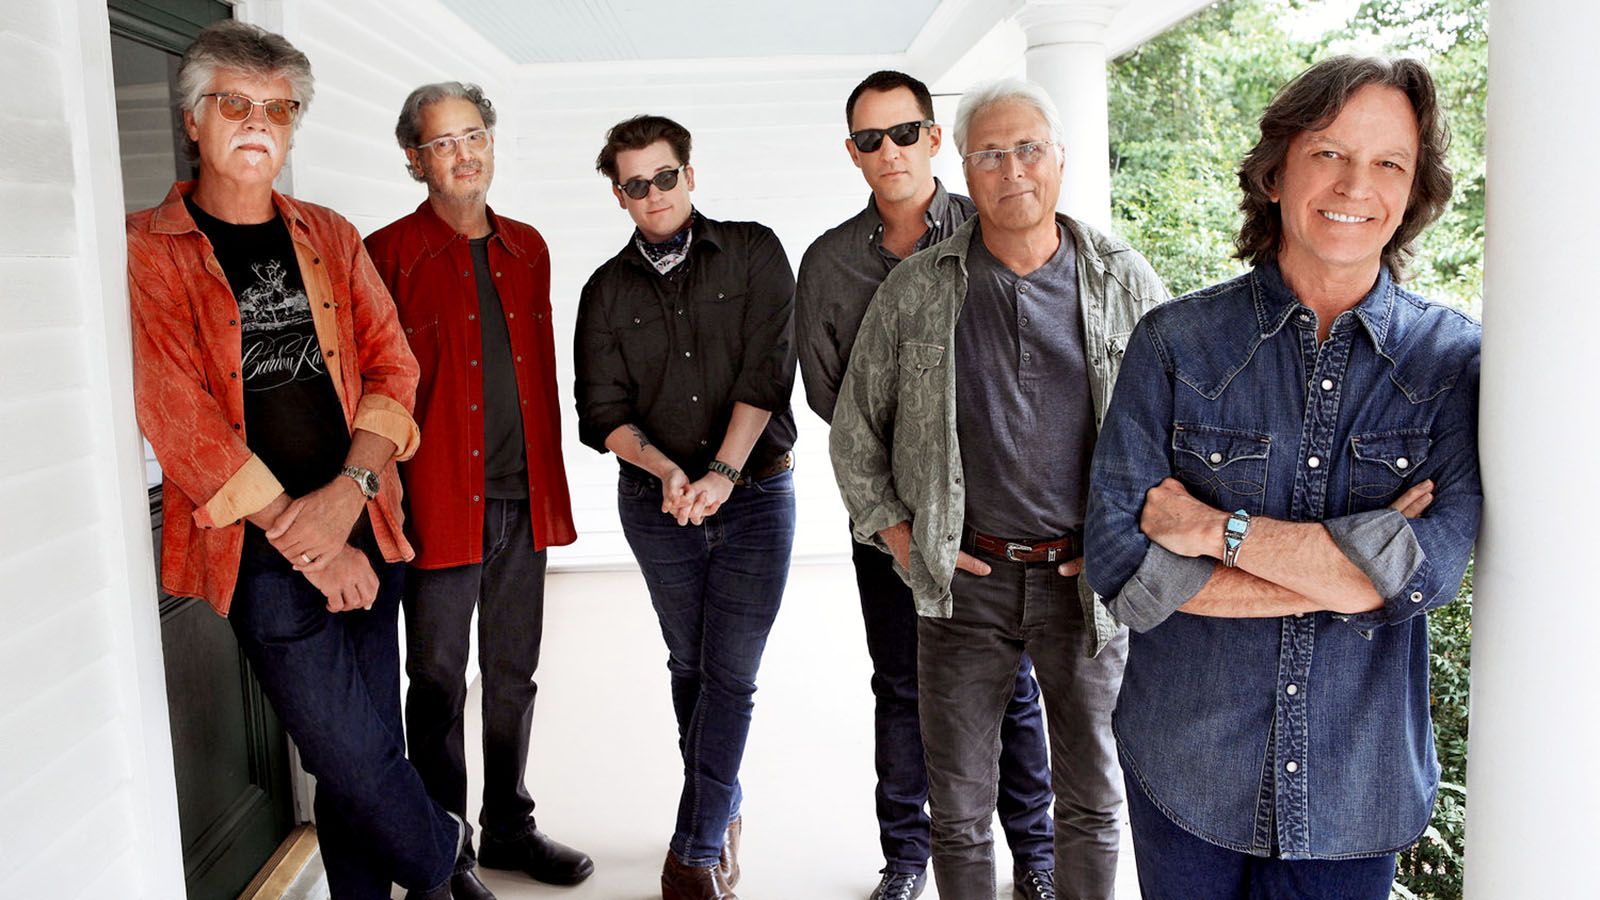 Nitty Gritty Dirt Band will be at Honeywell Center on June 28.